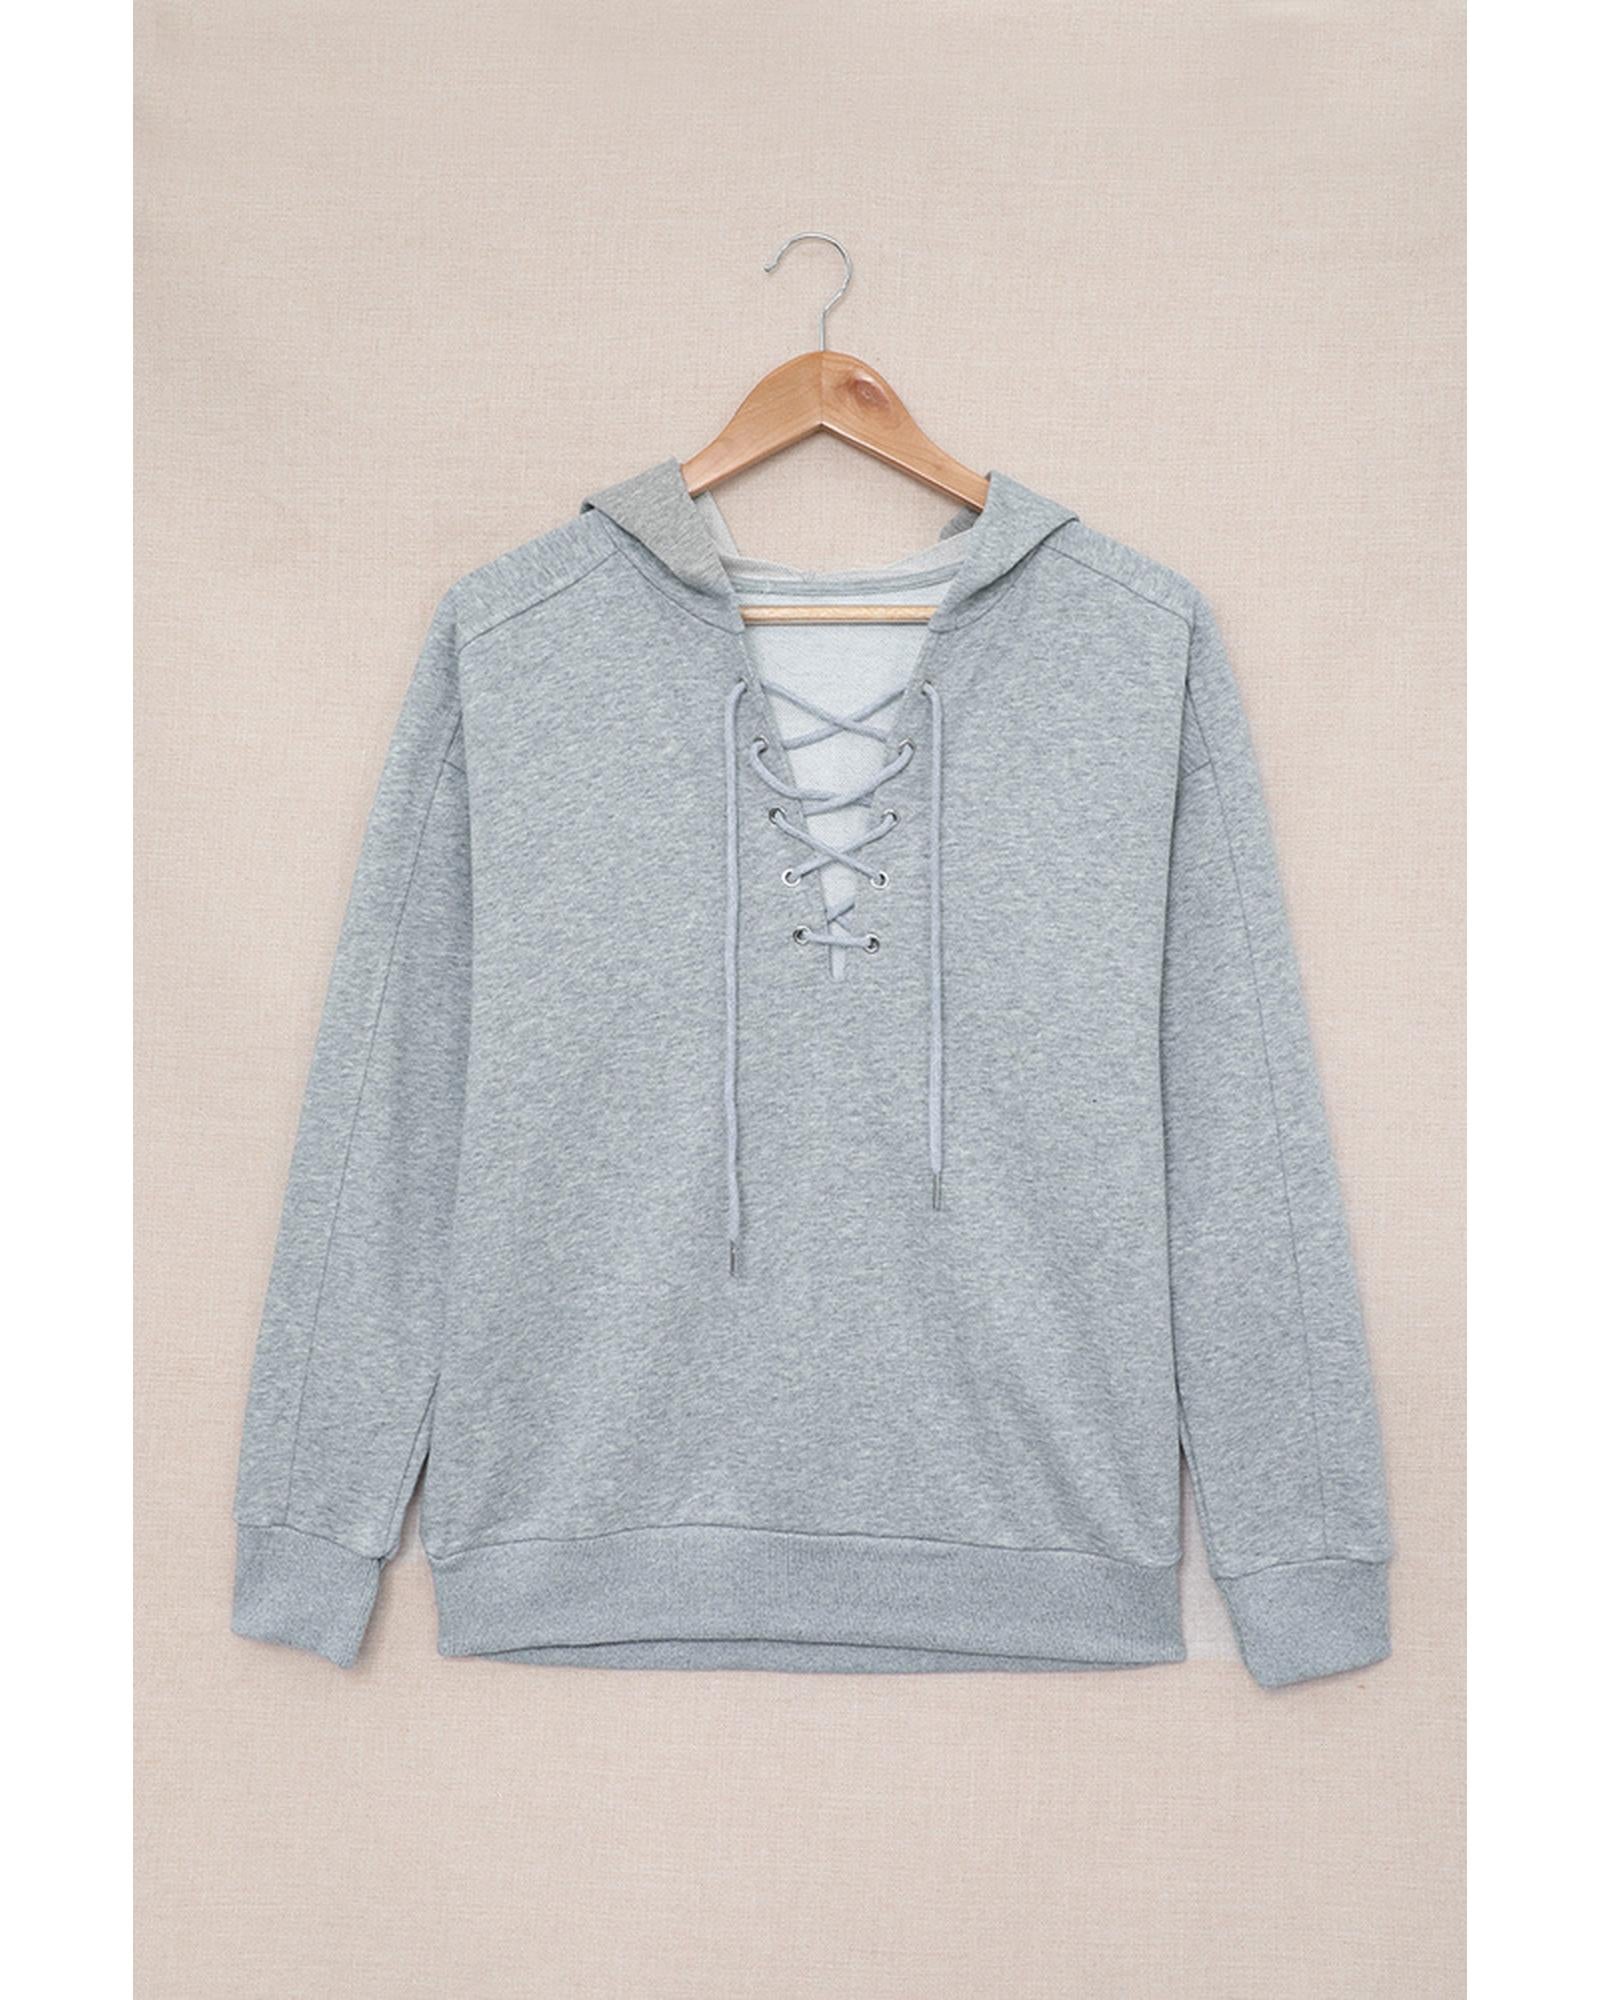 Azura Exchange Lace-up Grey Casual Hoodie - S